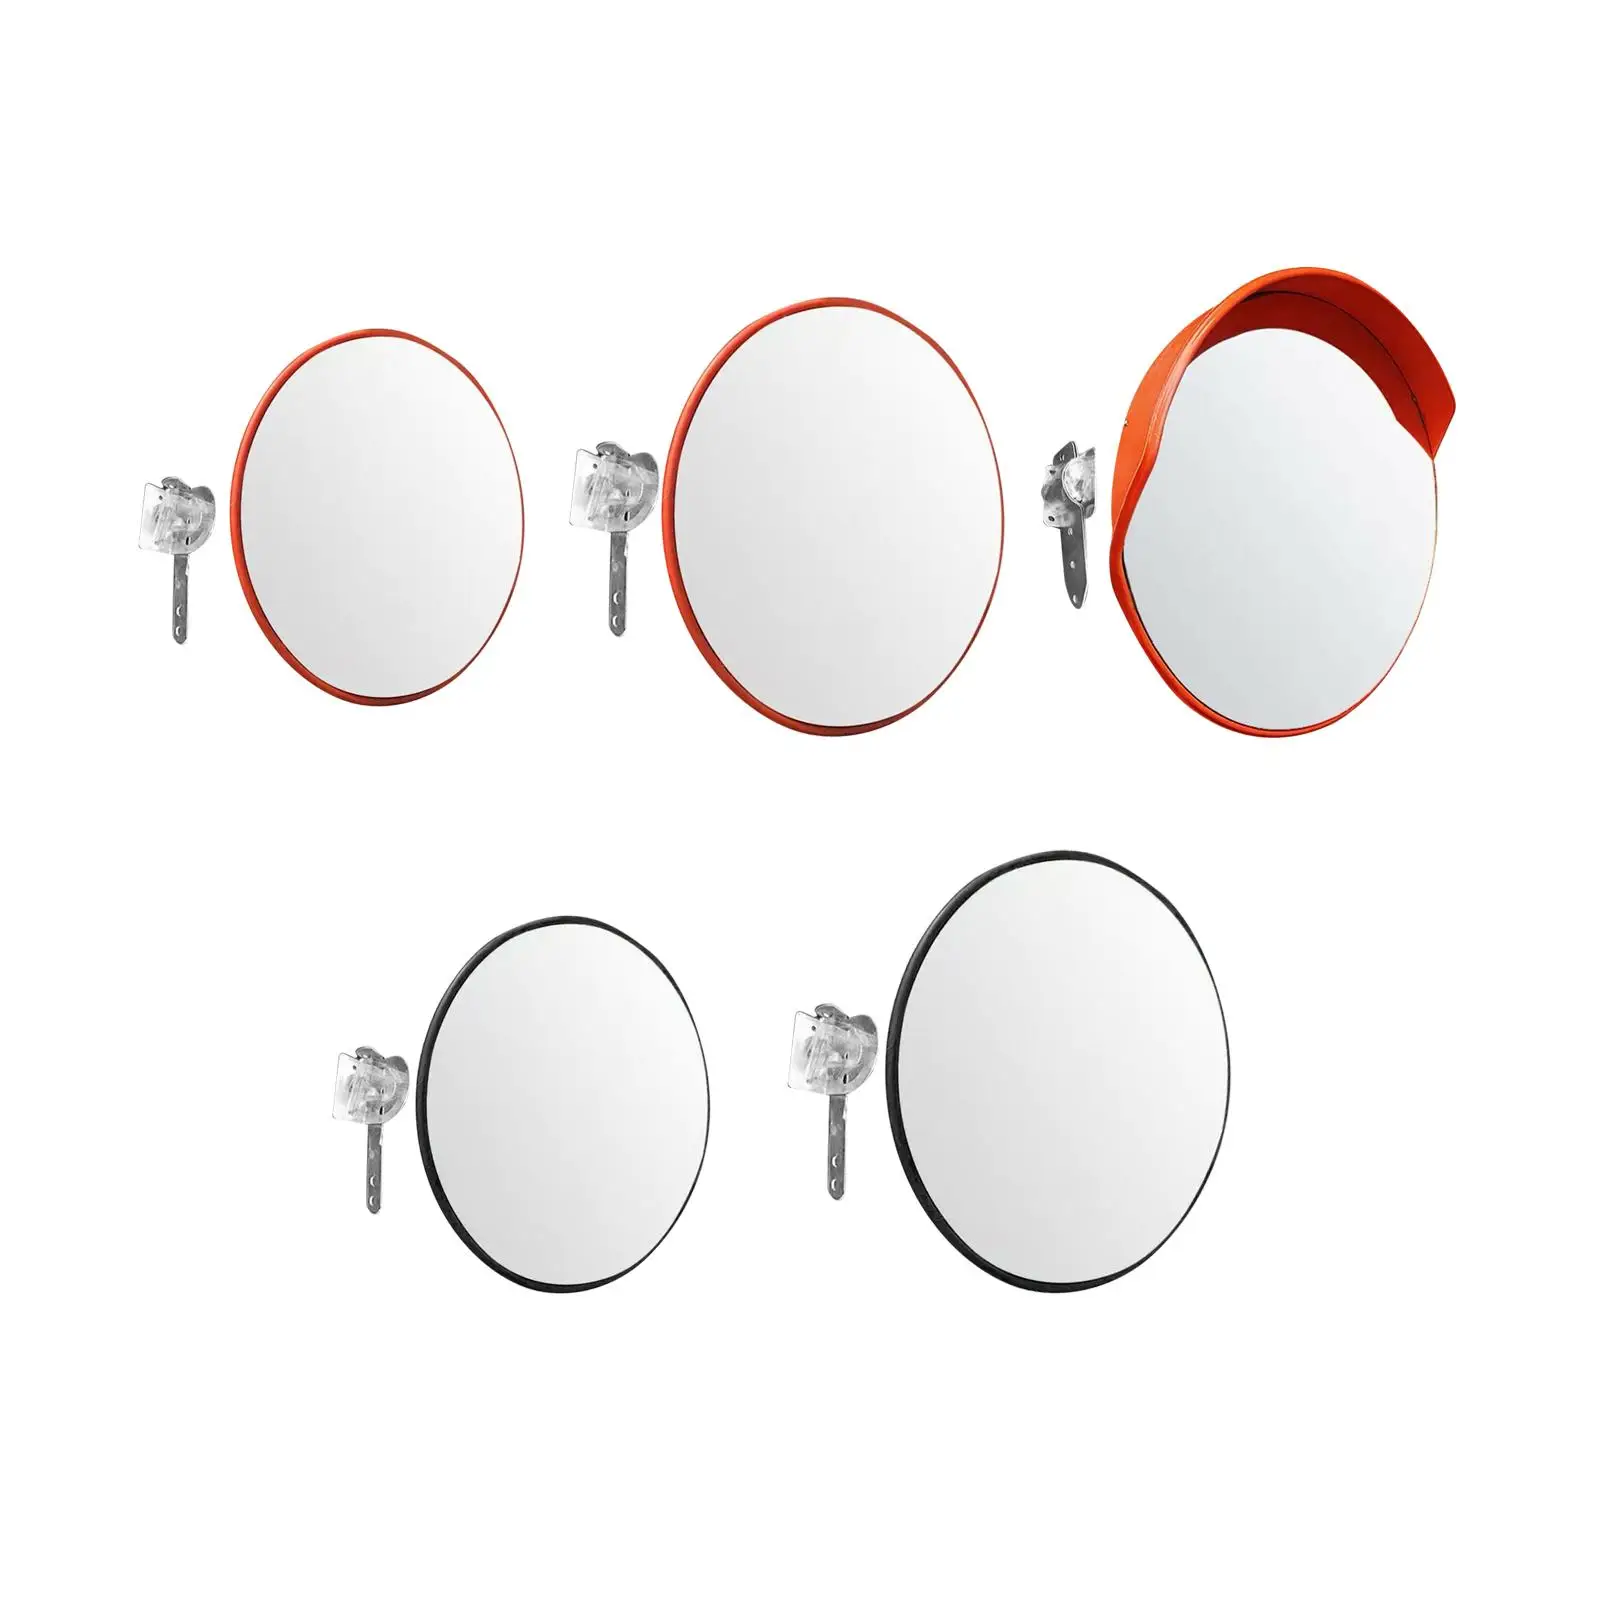 Convex Mirror Curved Safety Mirror Traffic Mirror Parking with Wall Fixing Bracket 220 Degrees Road Safety Convex Mirror